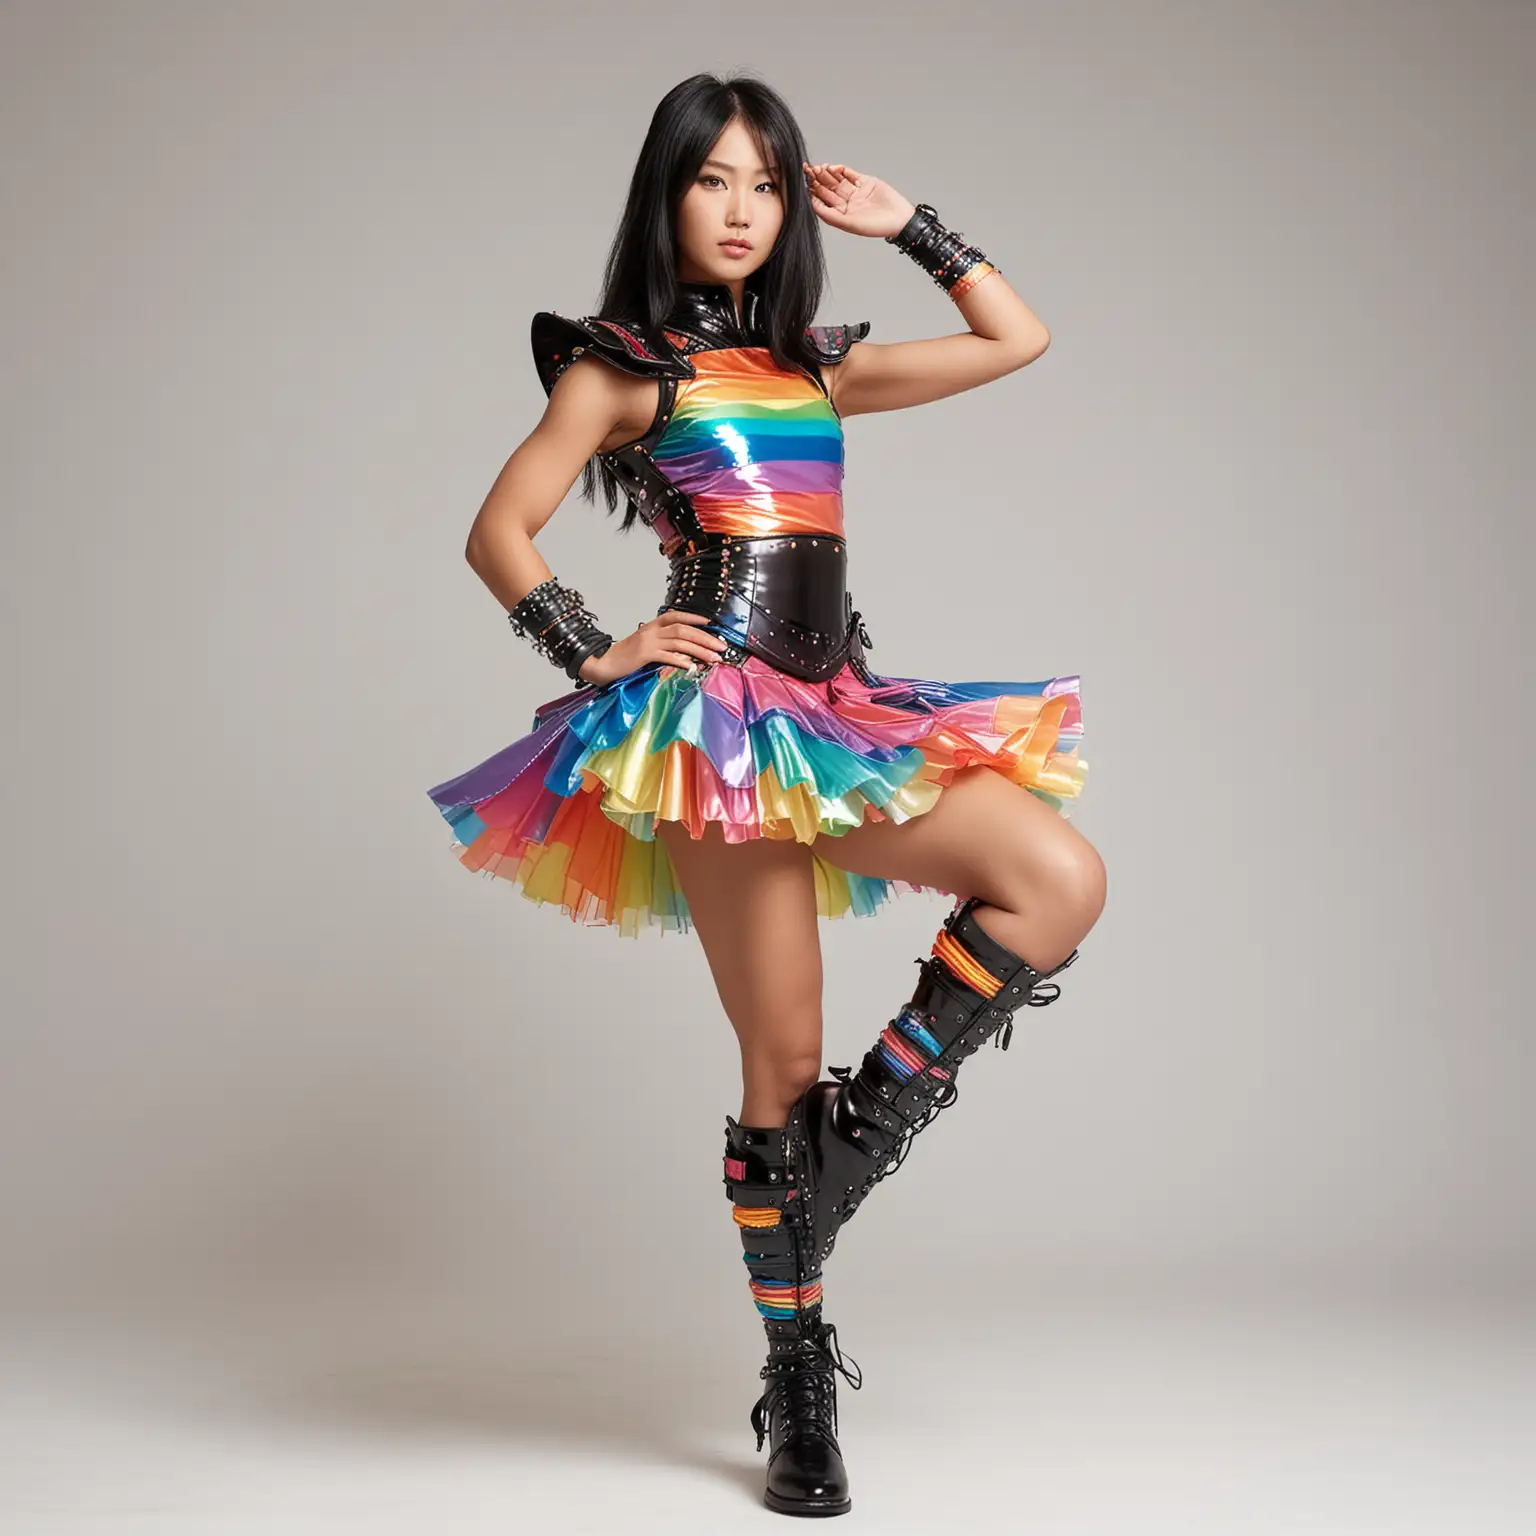 Standing front view, Beautiful toned athletic muscular figure female Japanese supermodel with large breasts, long black hair, in sleeveless rainbow metallic plastic samurai-knight armor with Chinese printing, bare shoulders, midriff exposed, shoulders exposed, sleeveless, giant puffy rainbow ballerina tutu, chromatic rainbow thigh-high socks, boots, white background